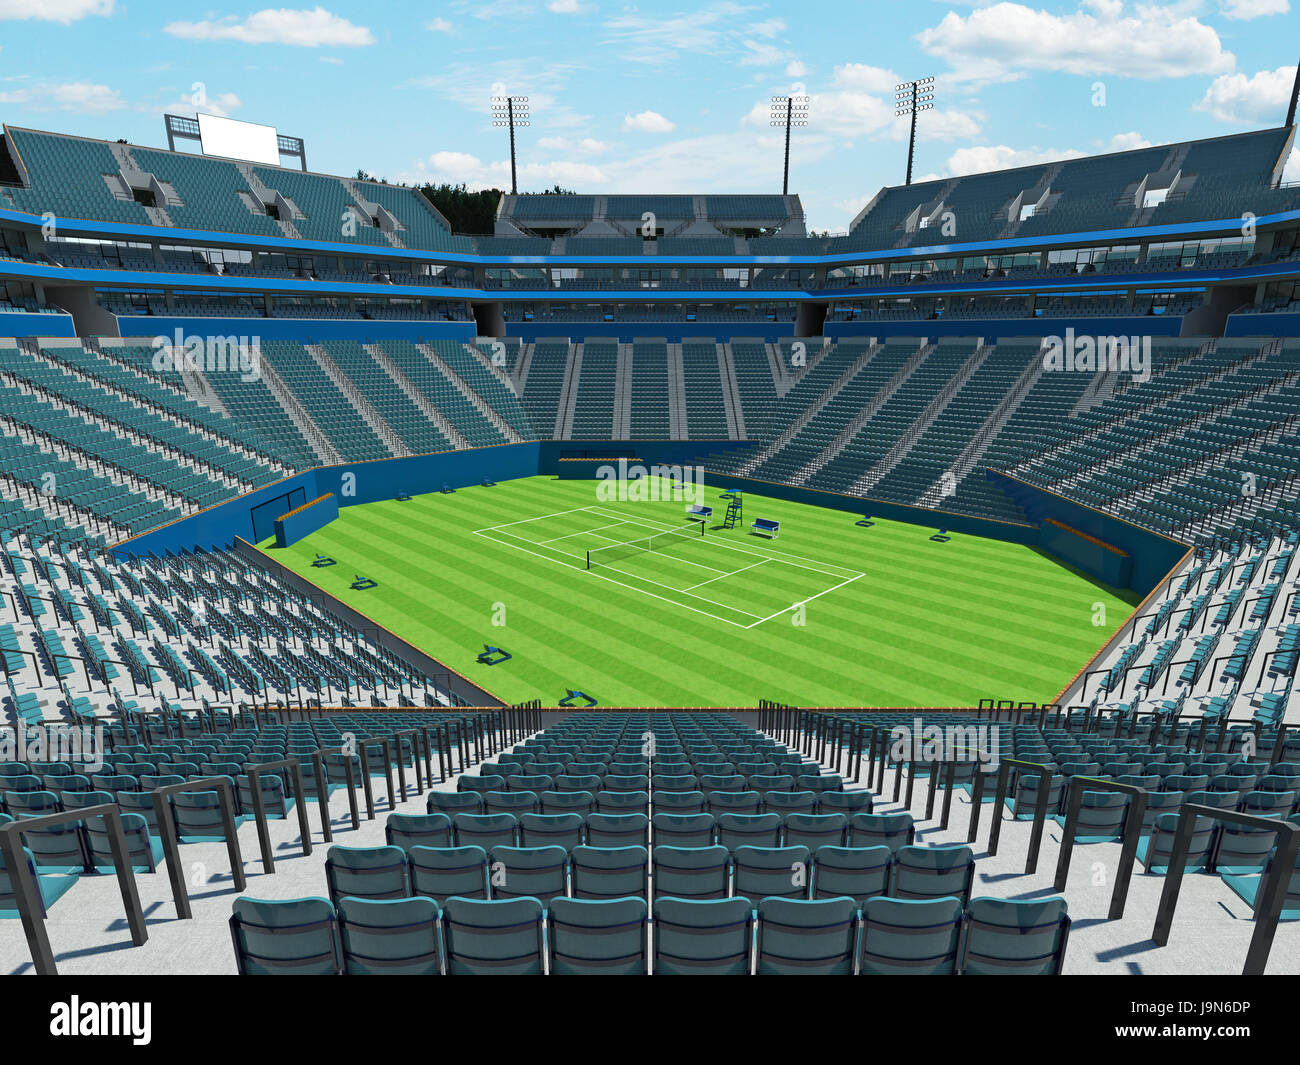 3D render of beautiful large modern tennis grass court stadium with blue chairs Stock Photo